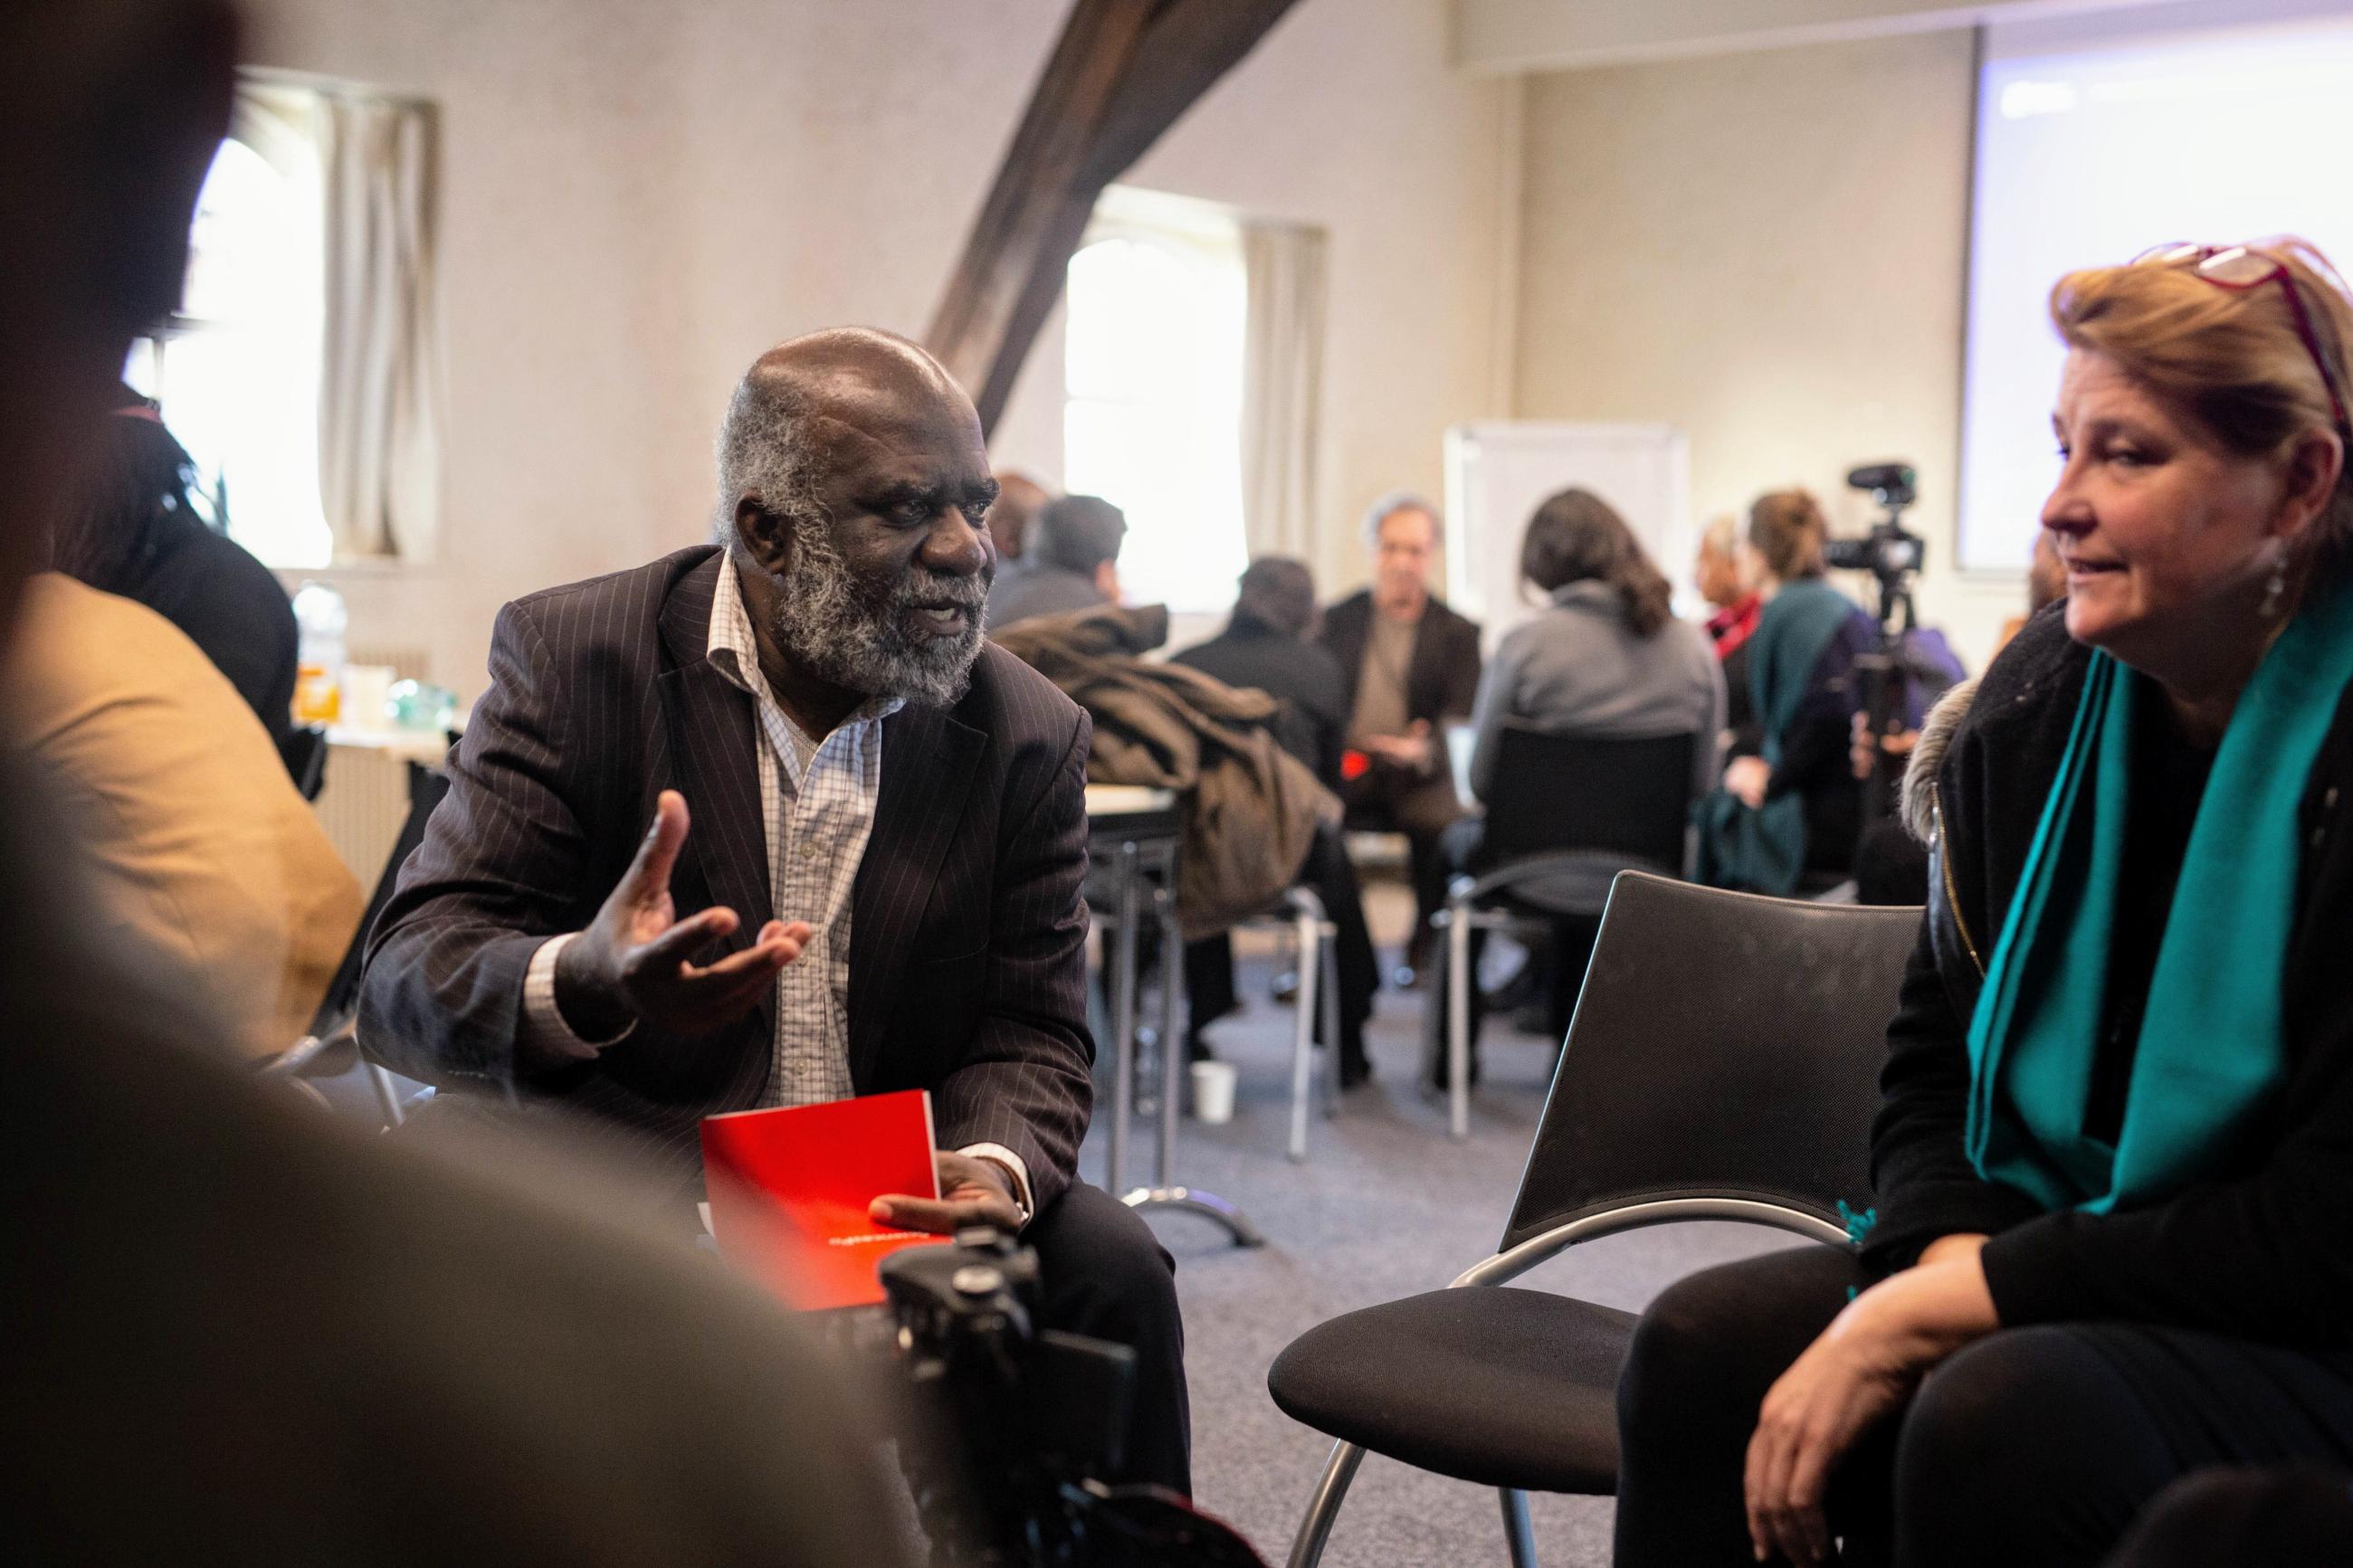 Two people talking at the Othering & Belonging Paris symposium in January 2020. One is a Black man wearing a suit, the other is a white woman with a green scarf and black shirt.